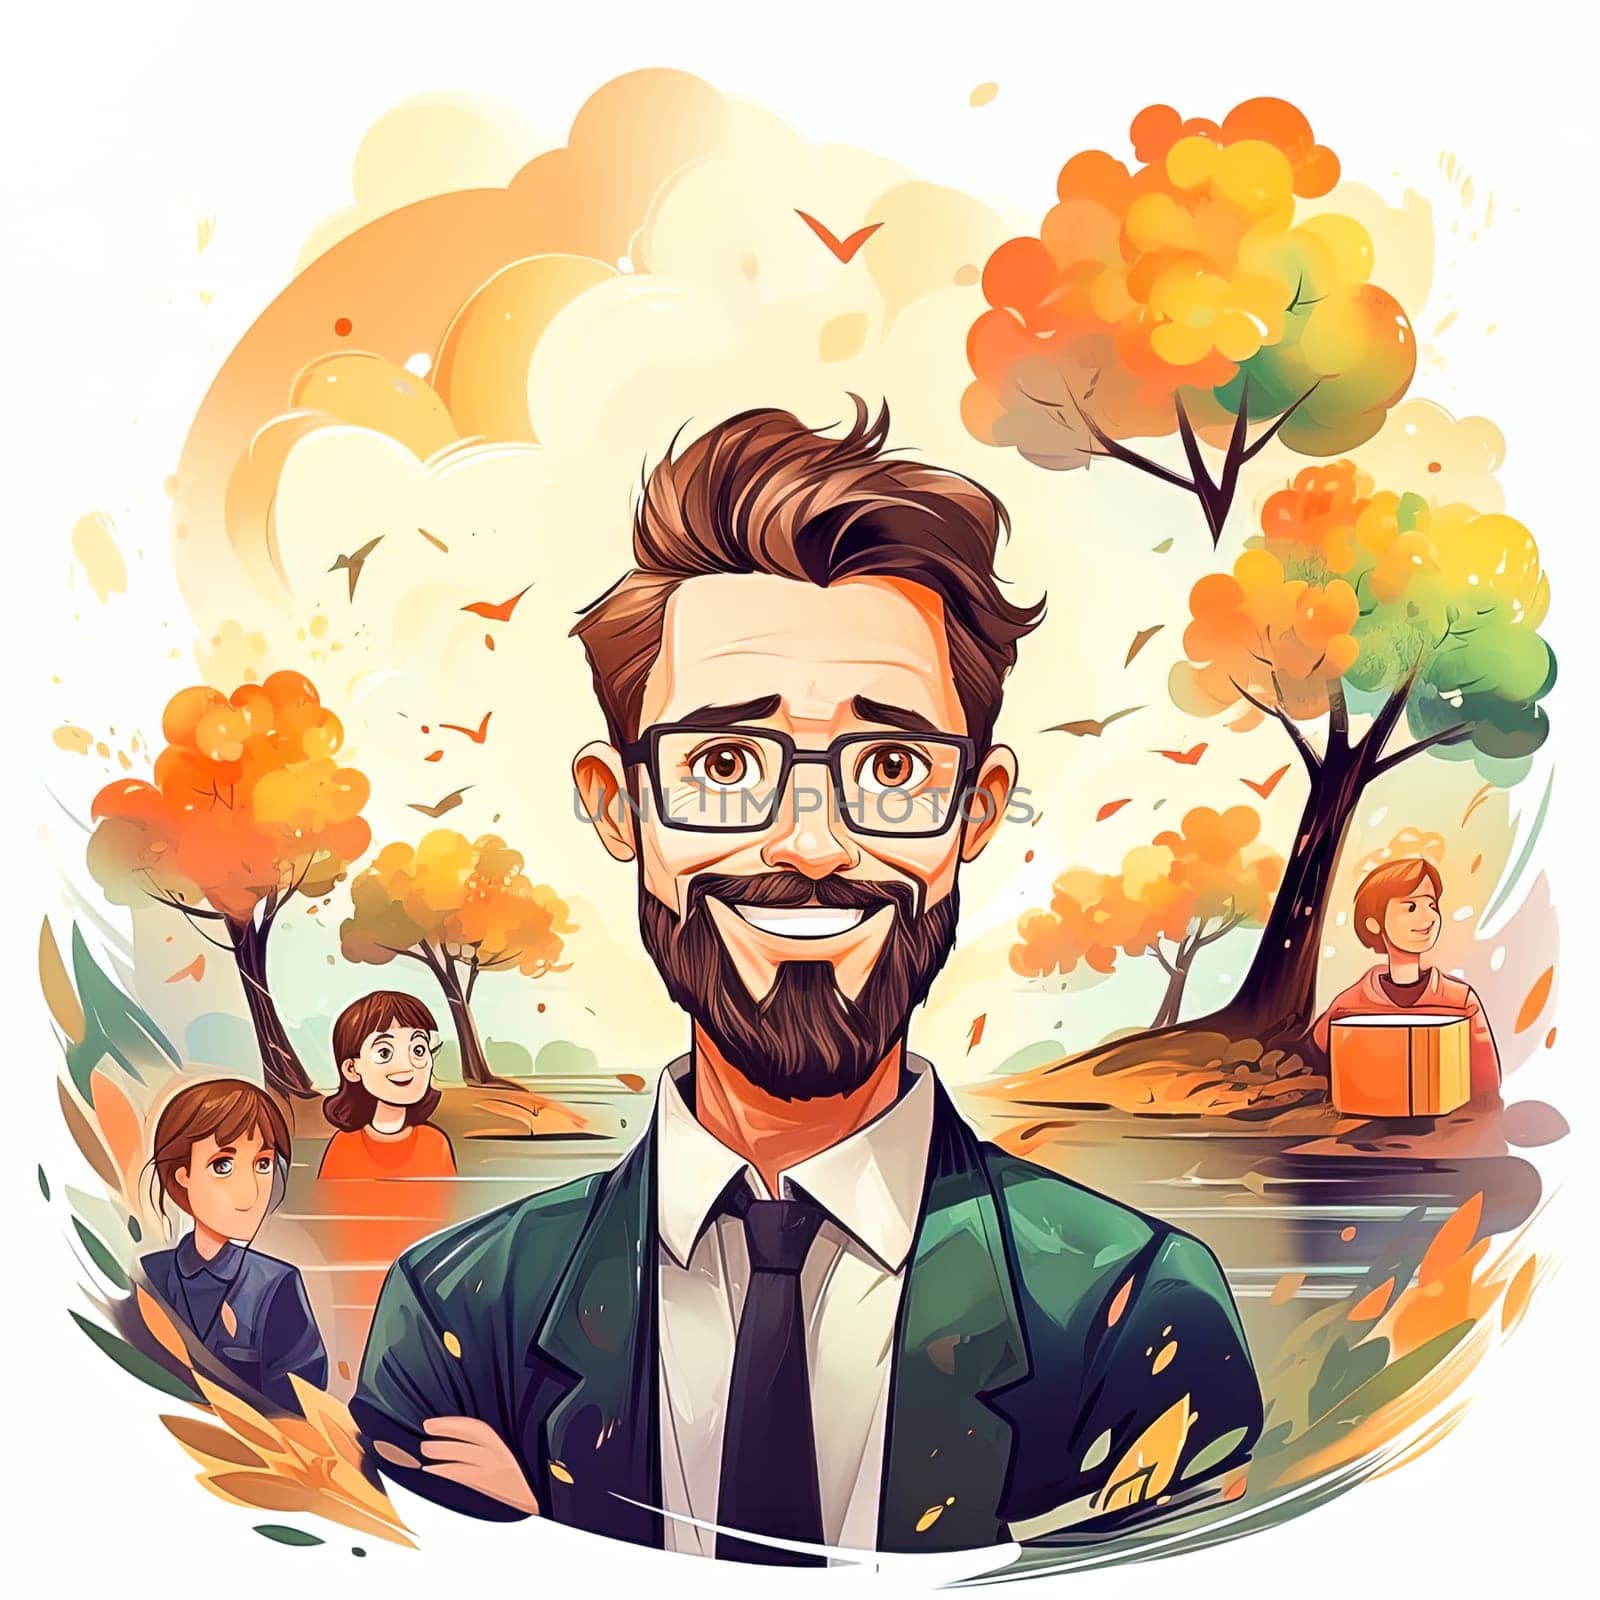 Illustration of a man with a beard of a primary school teacher. by Yurich32